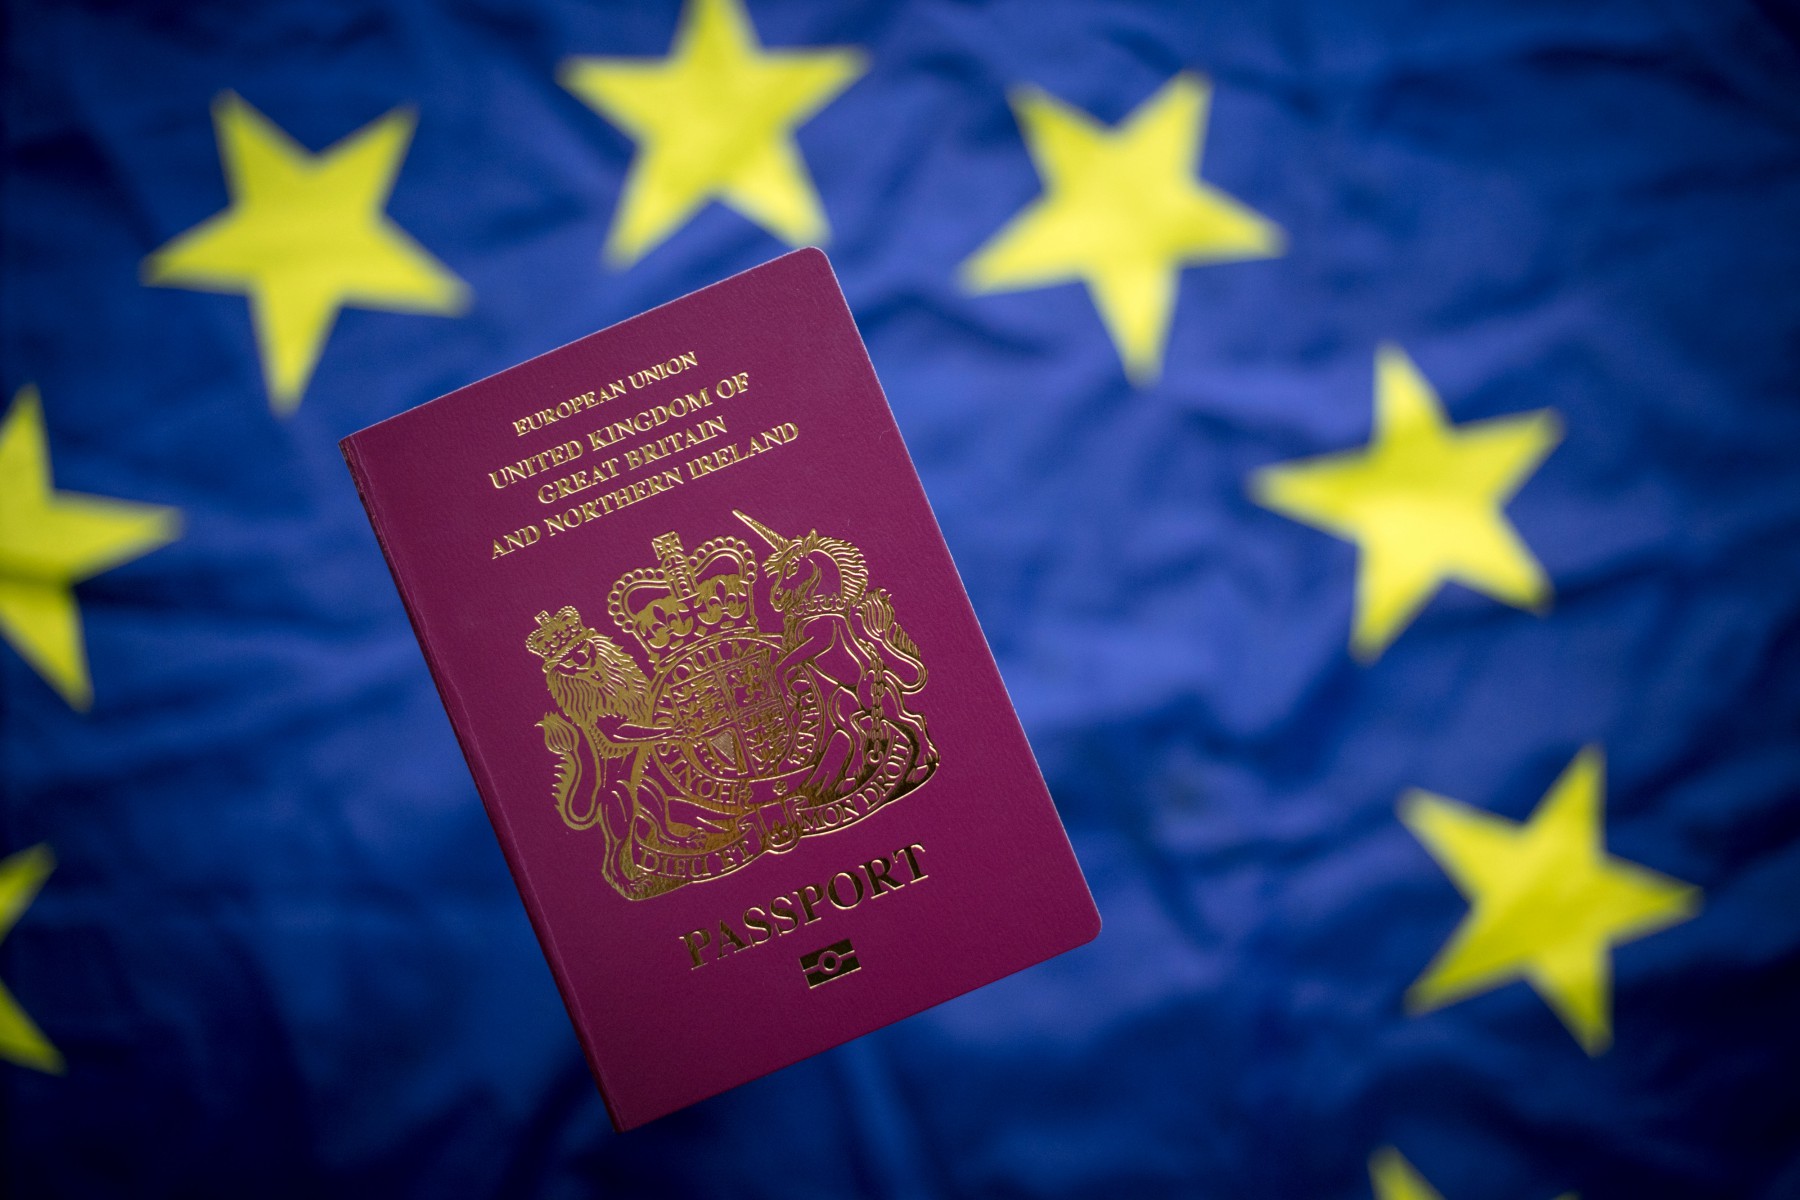 You might need up to 15 months on your passport for it to be valid in the EU